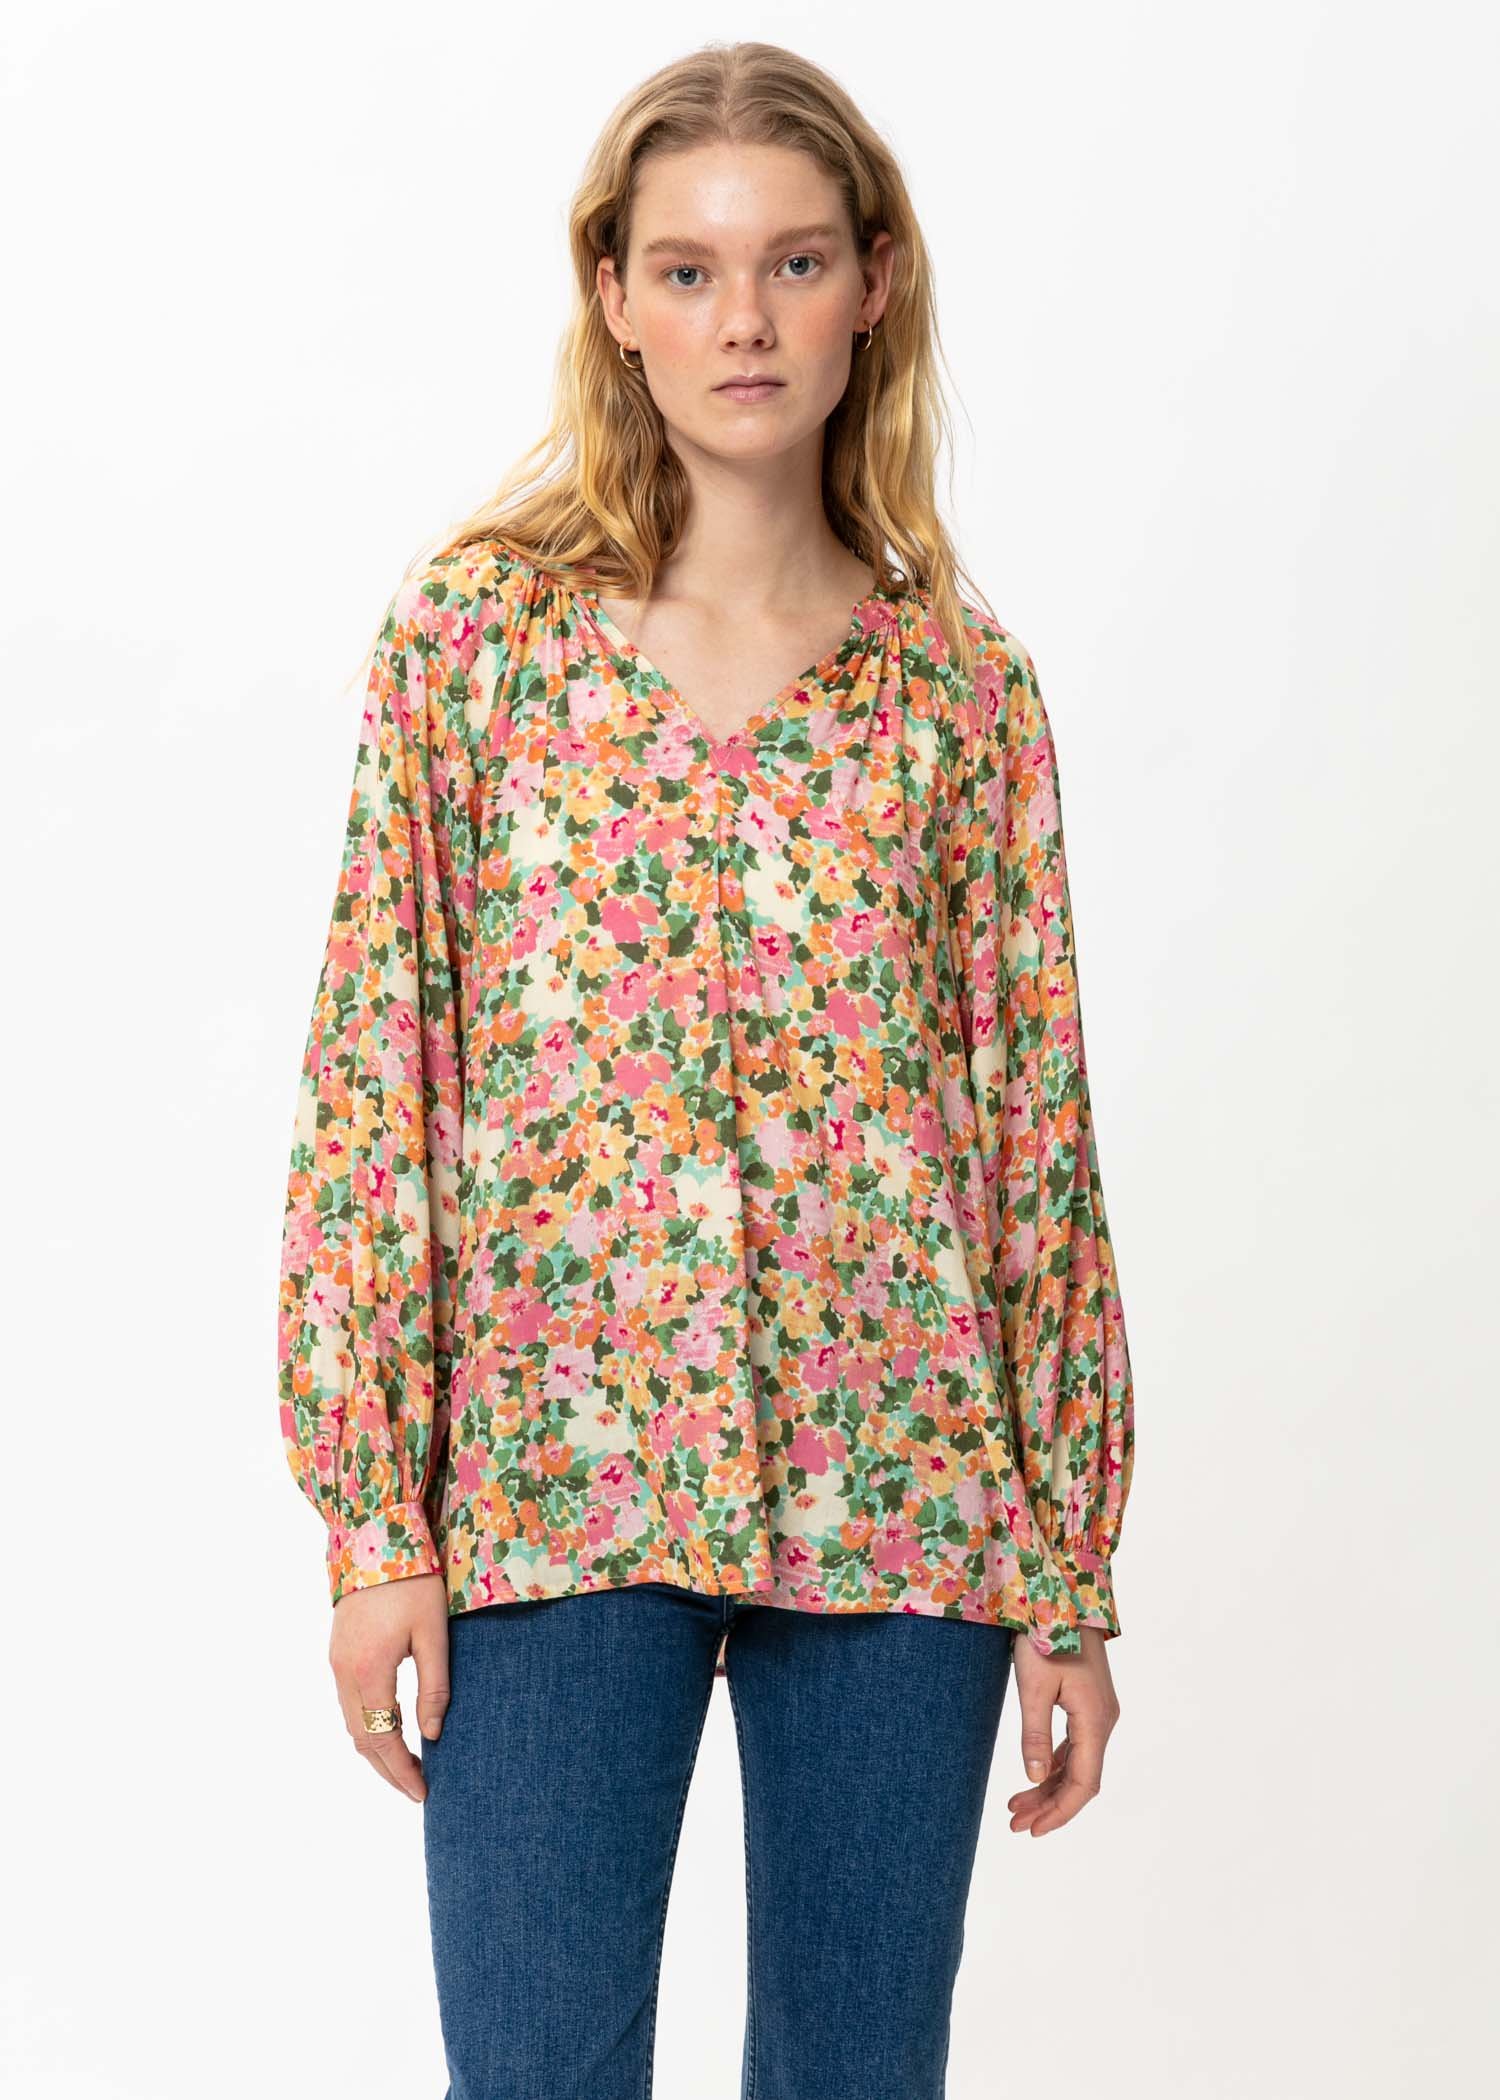 Floral blouse with puff sleeves